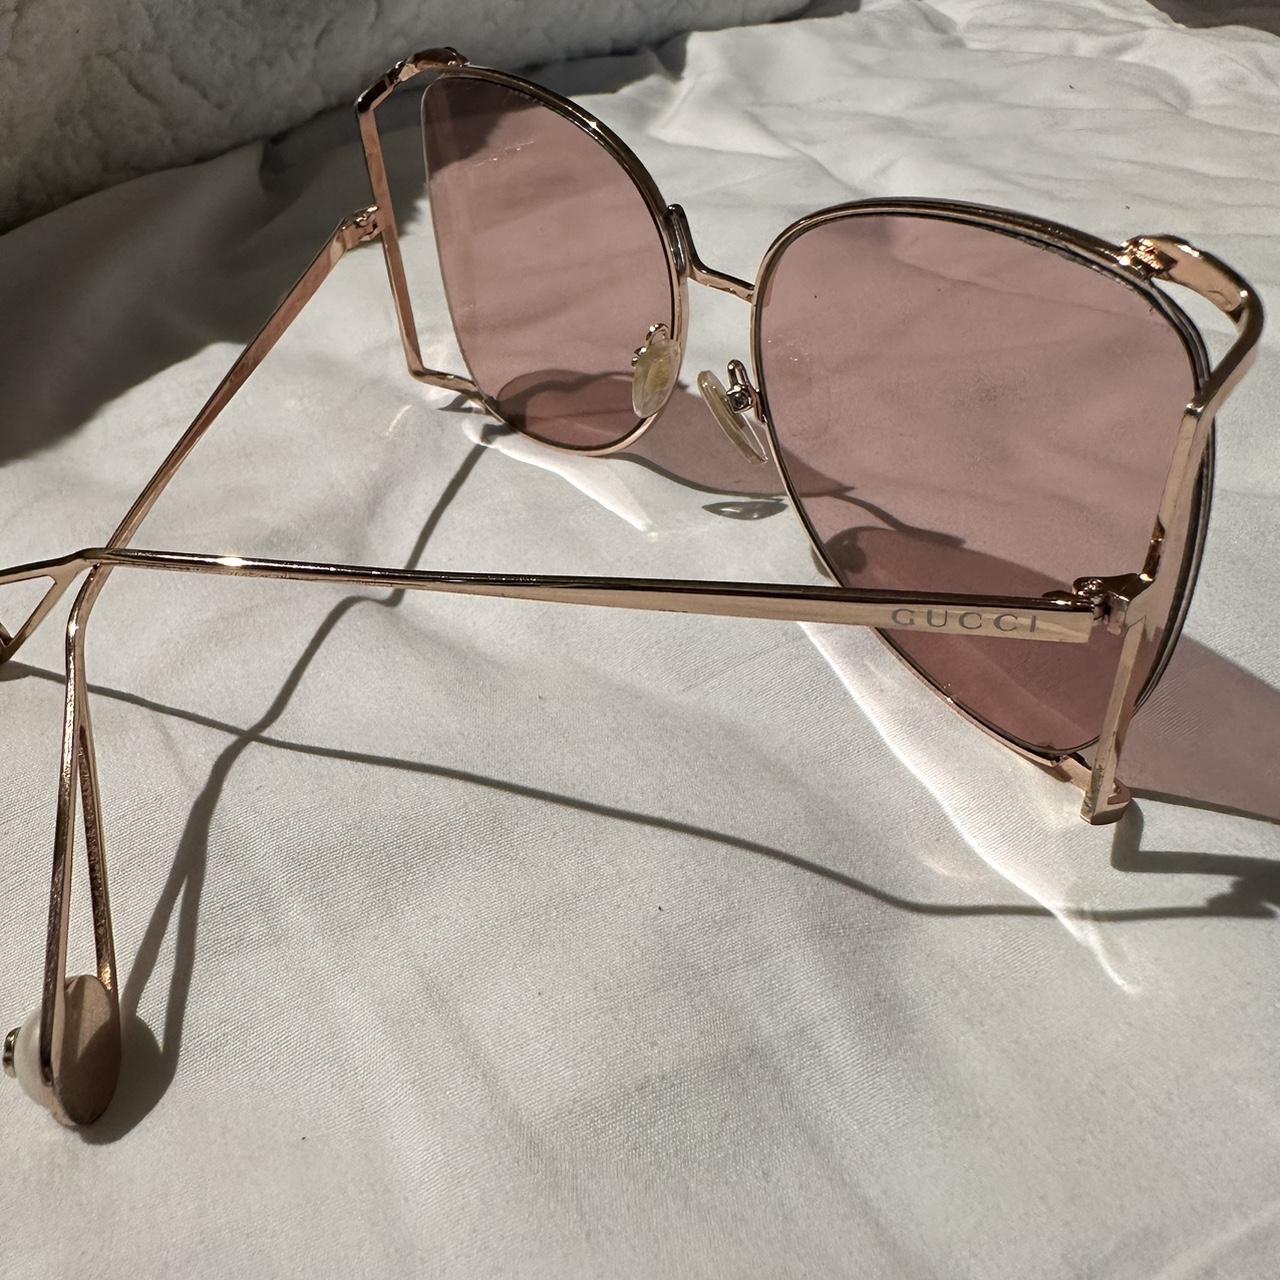 Gucci Women's Pink and Gold Sunglasses